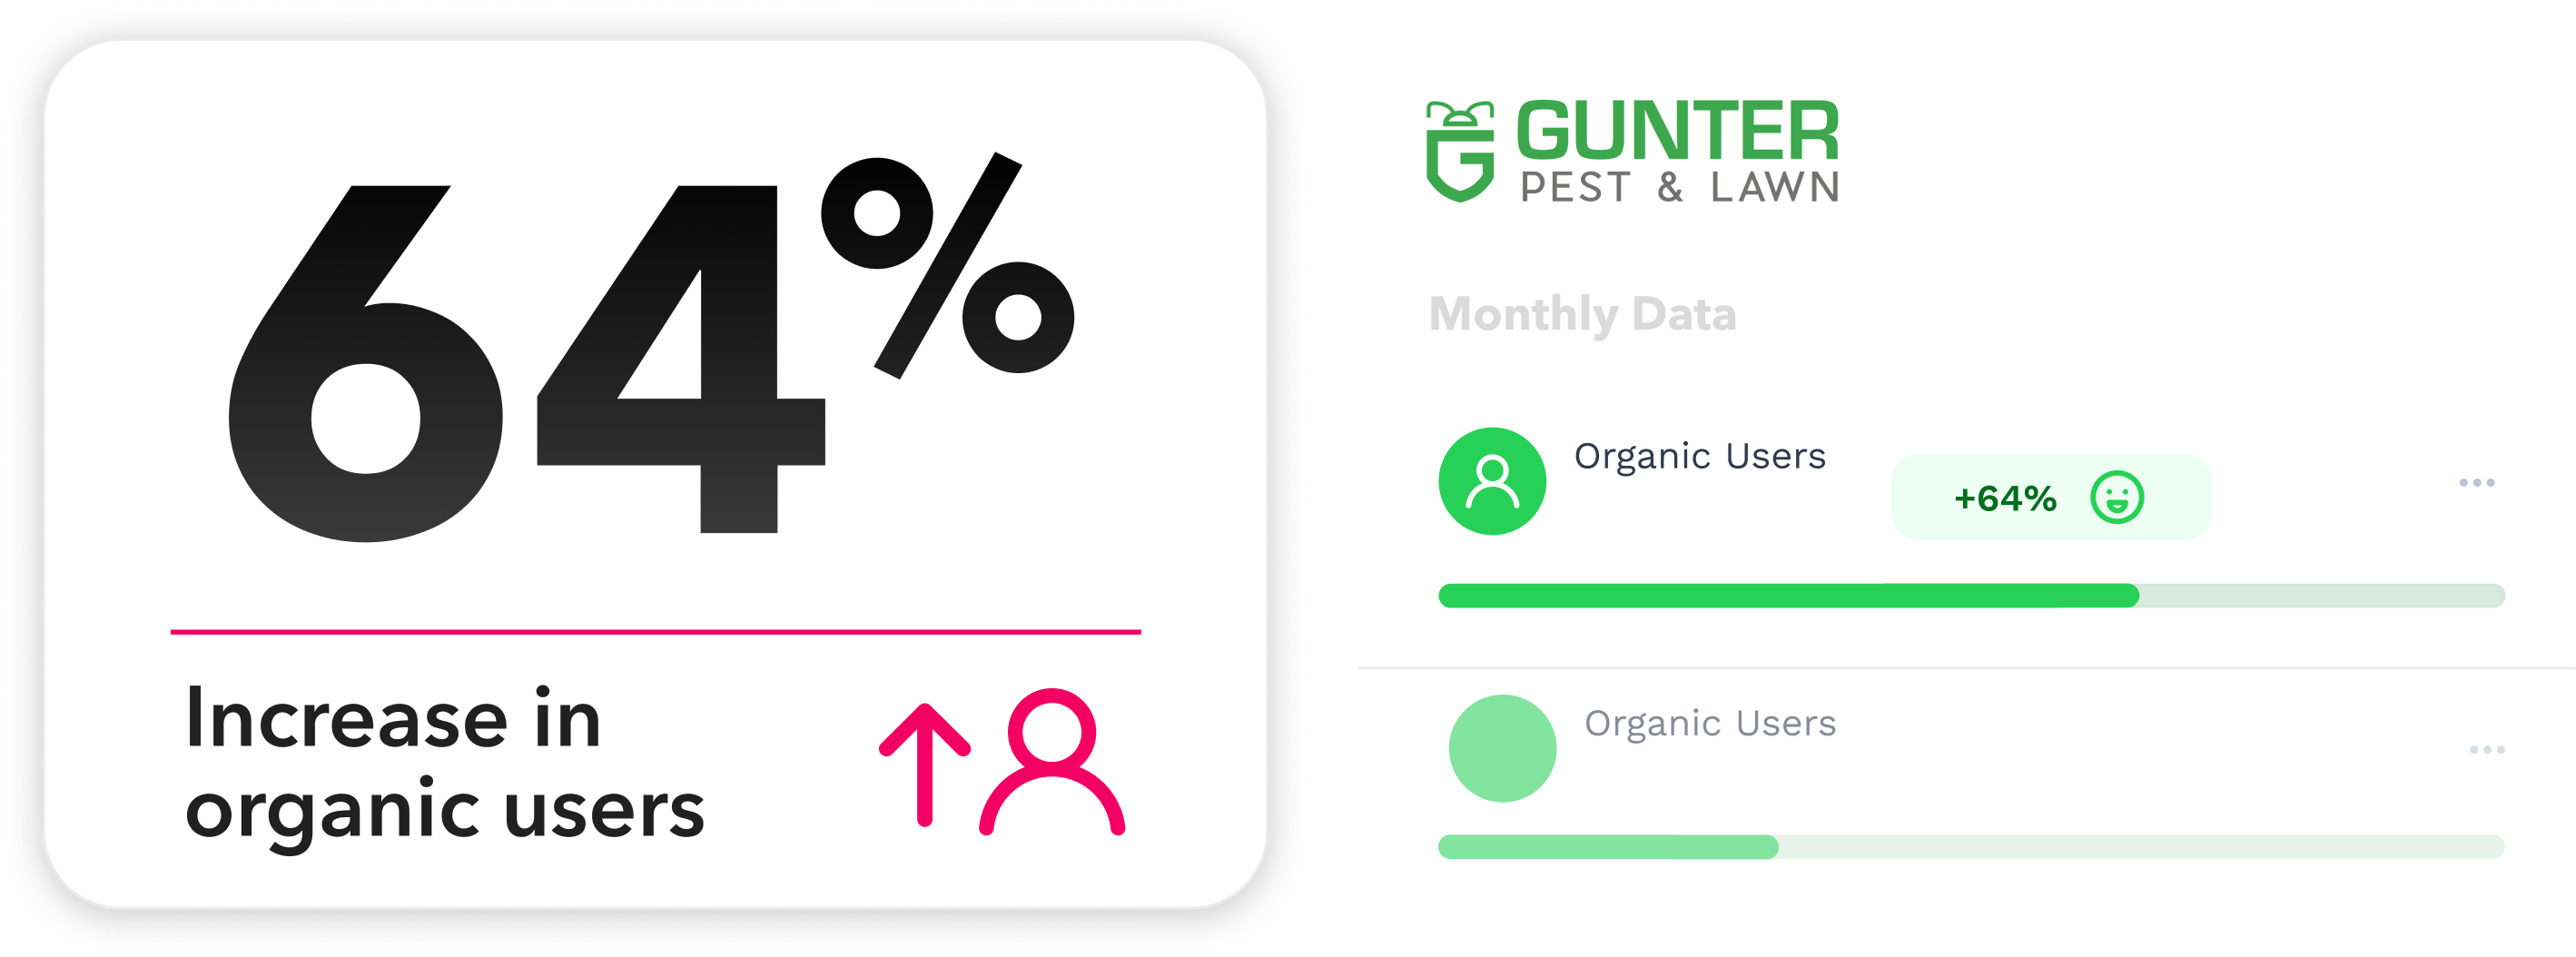 Pest Control SEO Case Study showing increase in organic users.